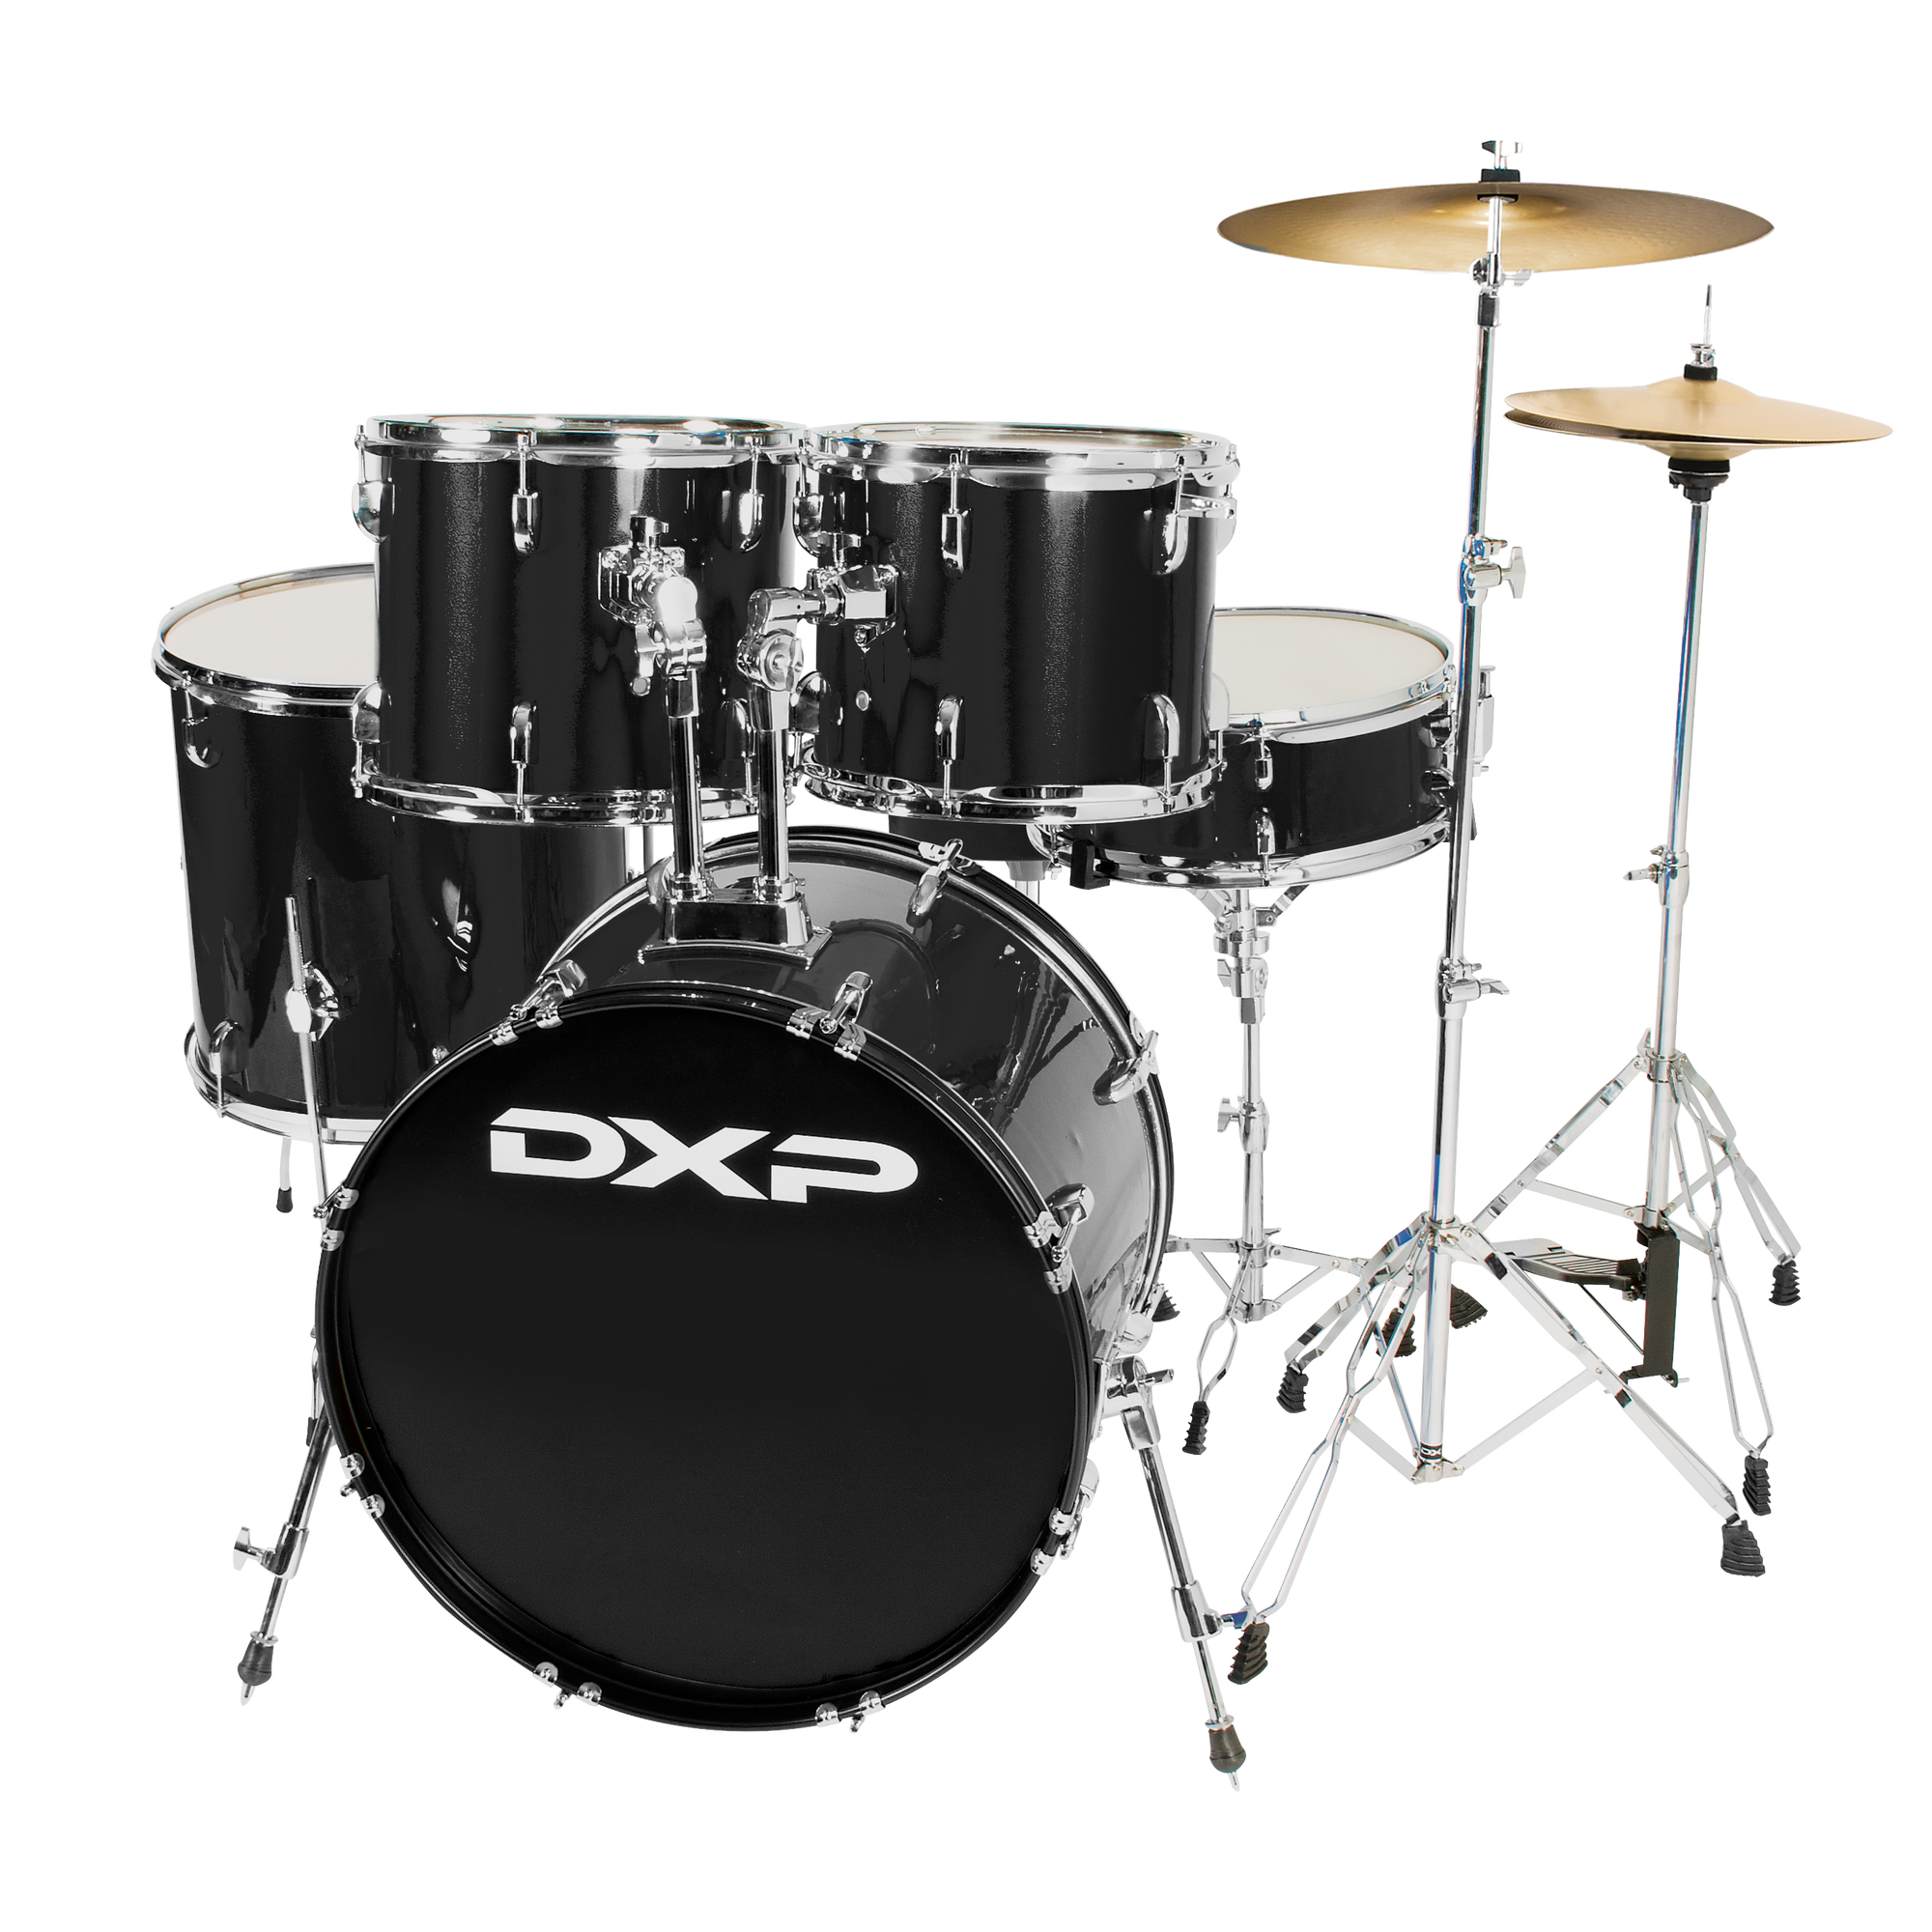 The DXP 5 piece Drum Kit is a great and highly affordable option for the starting drummer.It comes with hardware, cymbals and a drum stool.